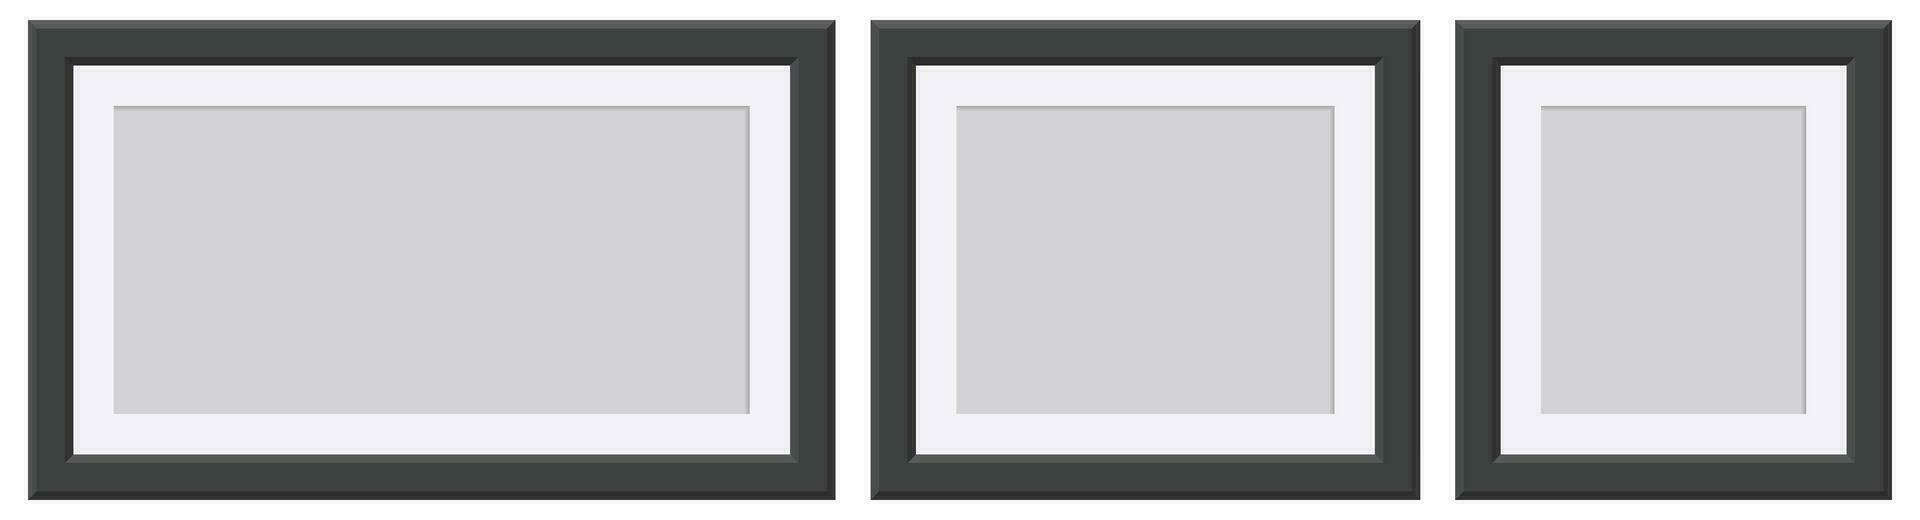 Black picture frame vector illustration isolated on white